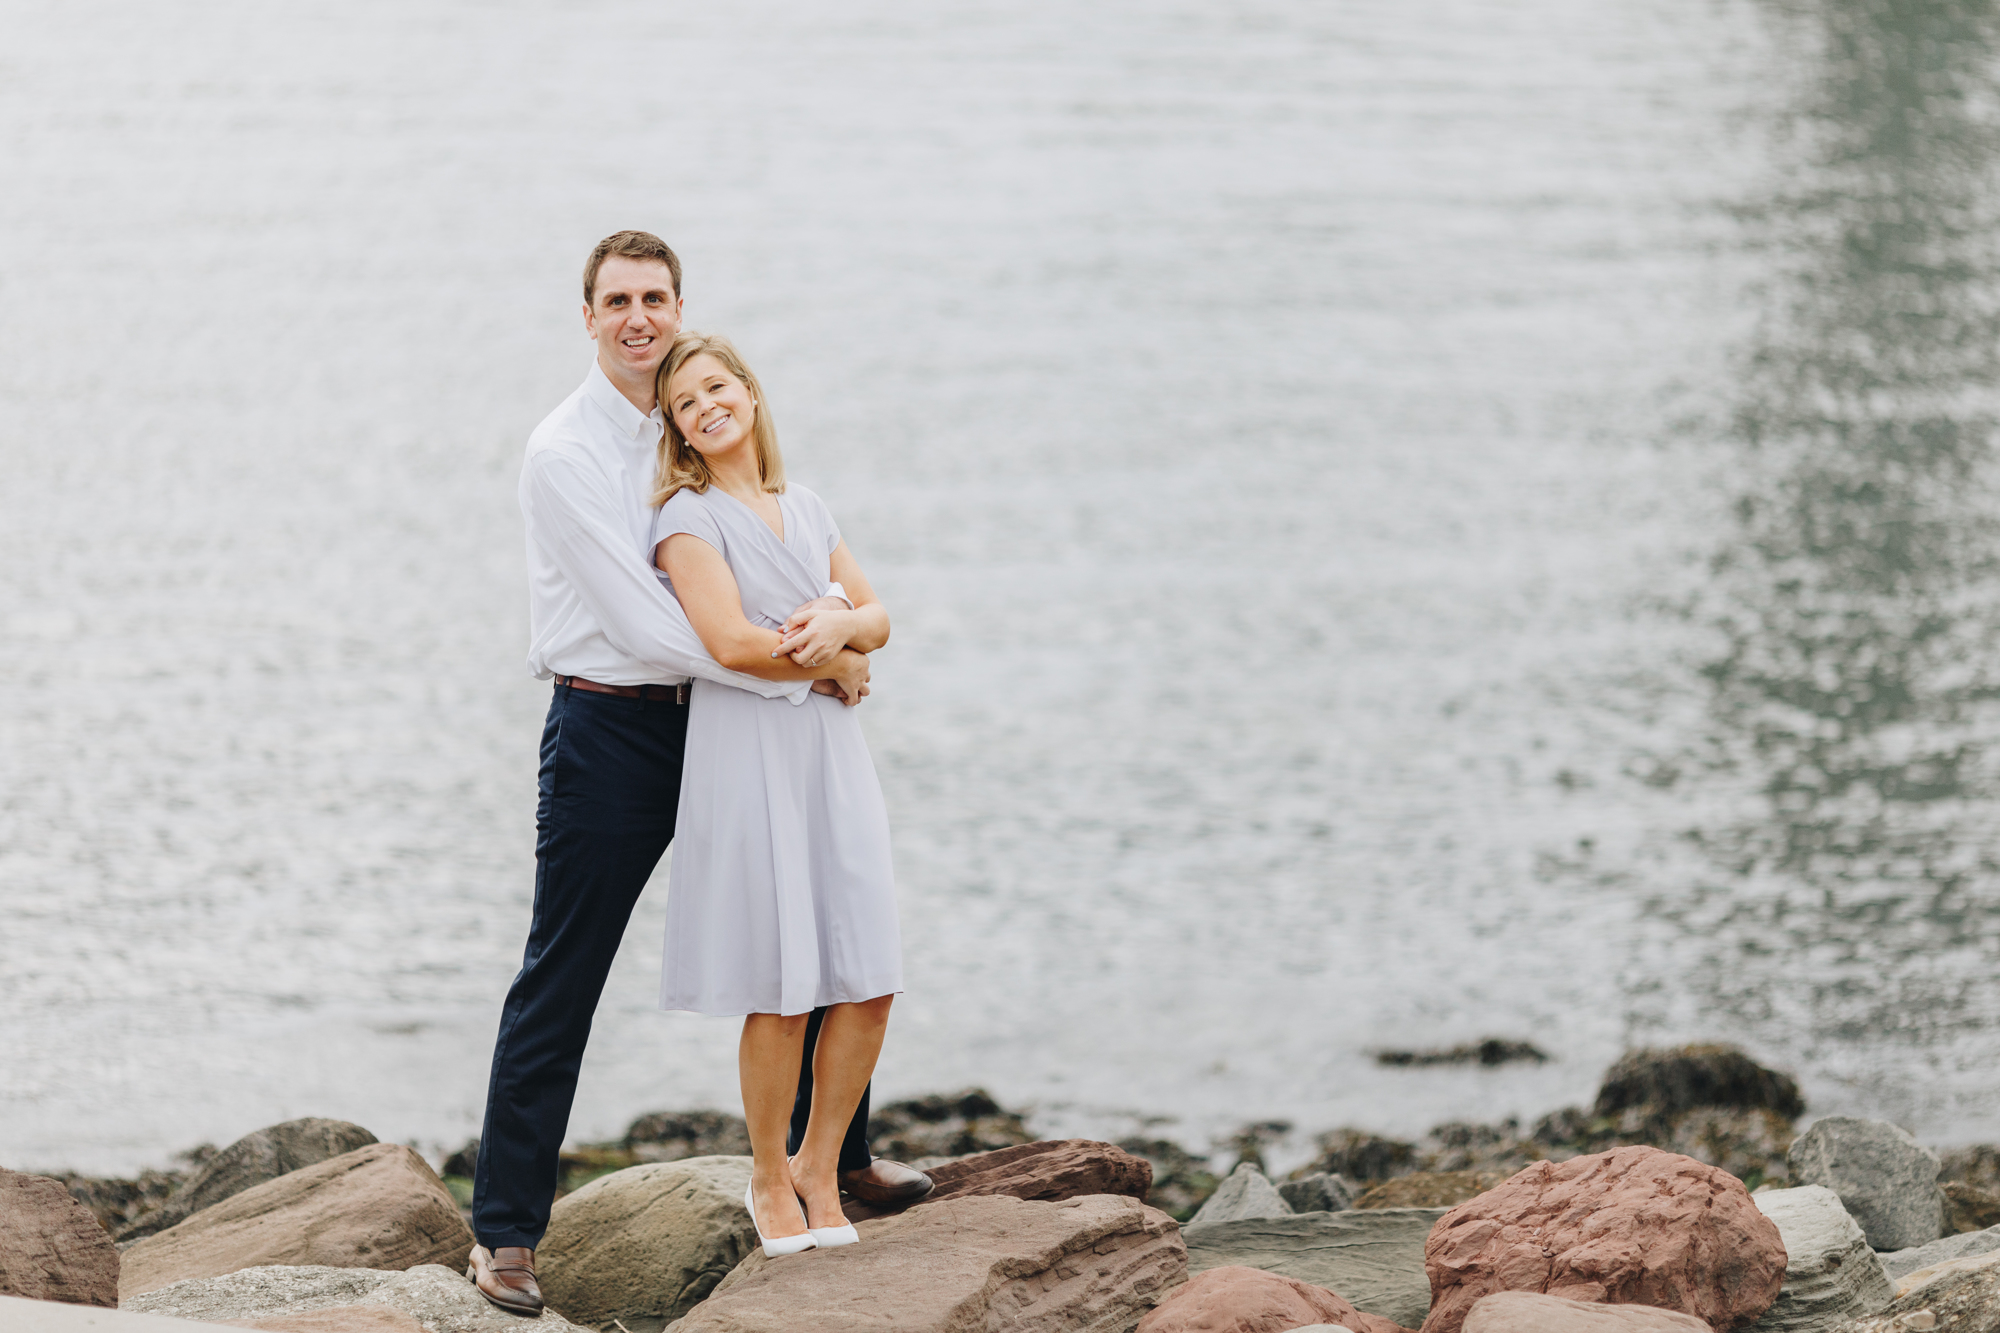 Sweet Brooklyn Bridge Park Engagement Photos on a Cloudy Day in New York